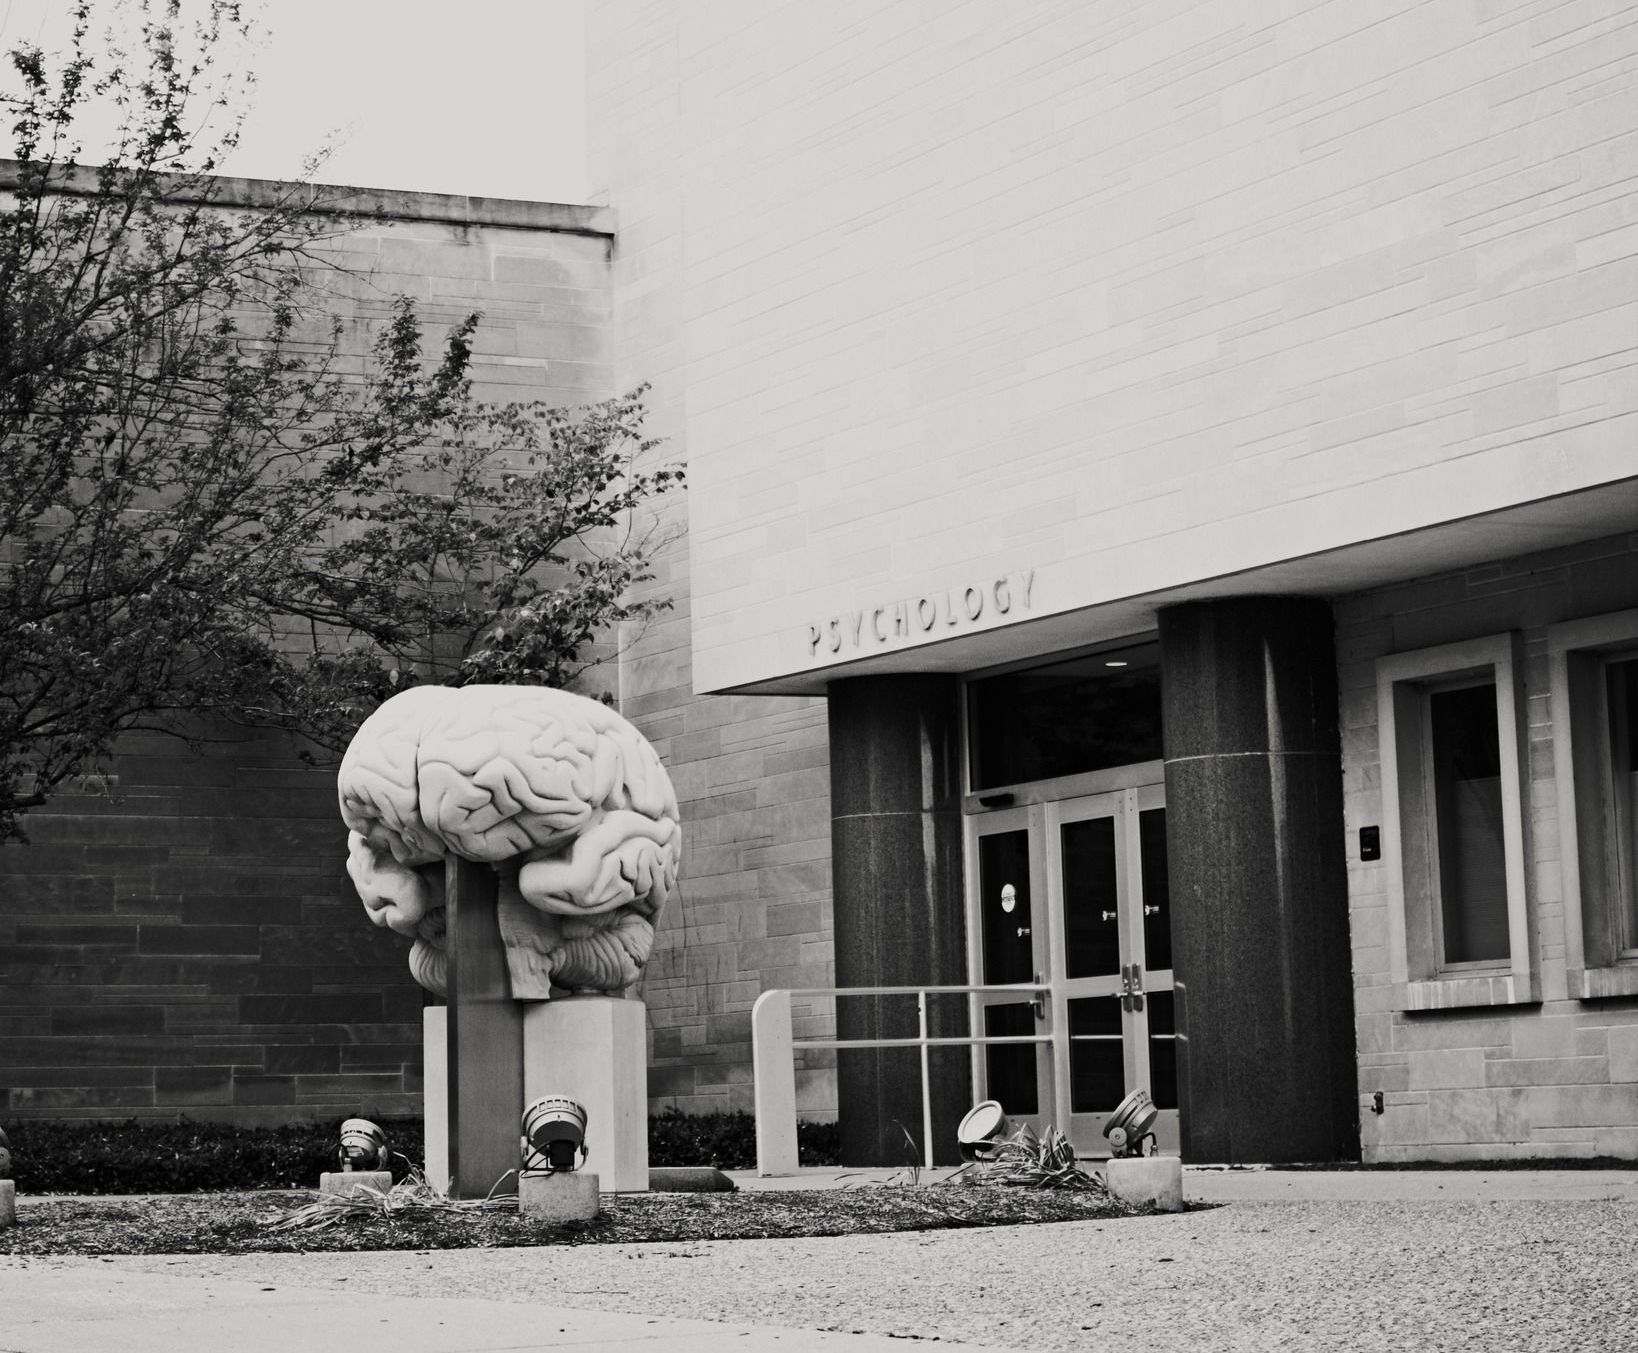 World's largest anatomically-accurate brain sculpture: Bloomington, Indiana